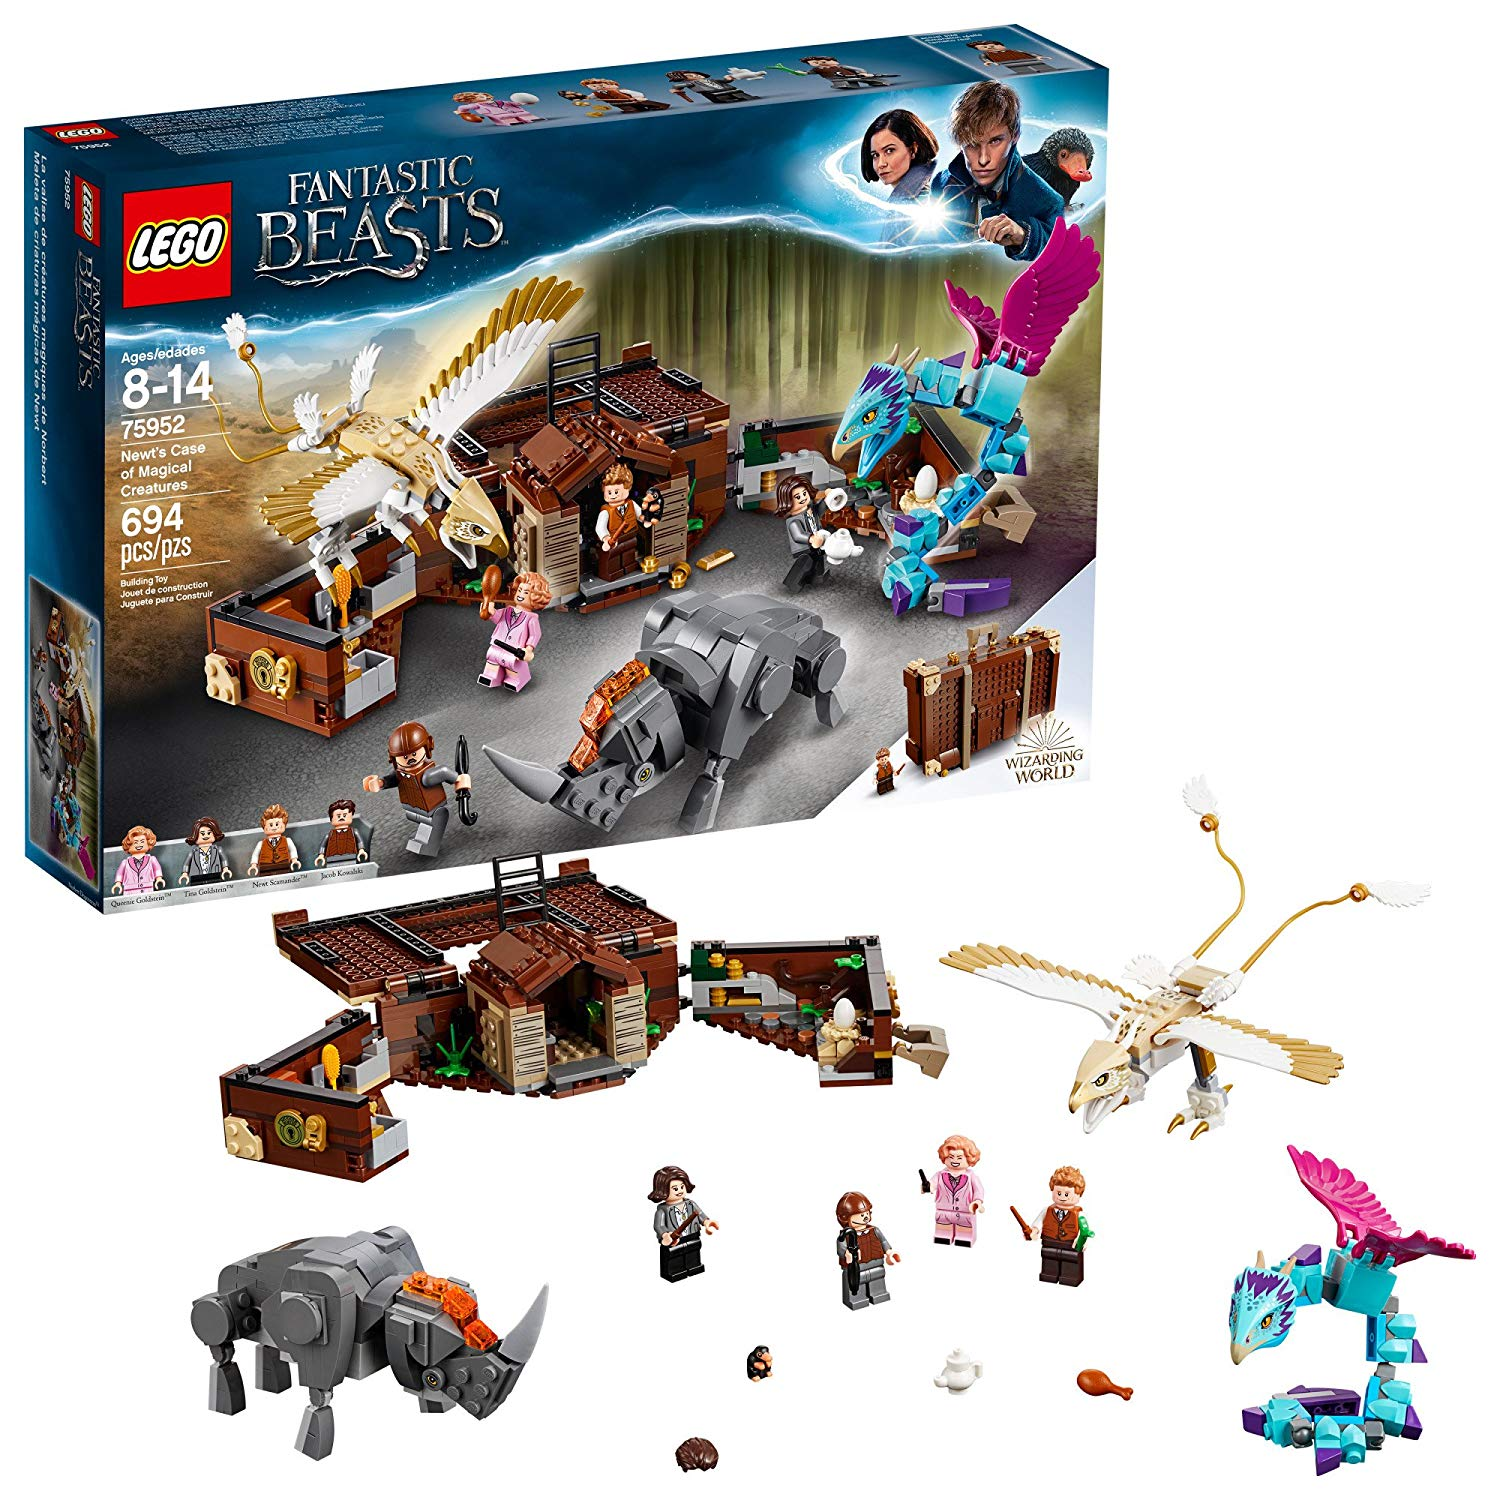 LEGO Fantastic Beasts Newt’s Case Magical Creatures Only $39.99 Shipped!